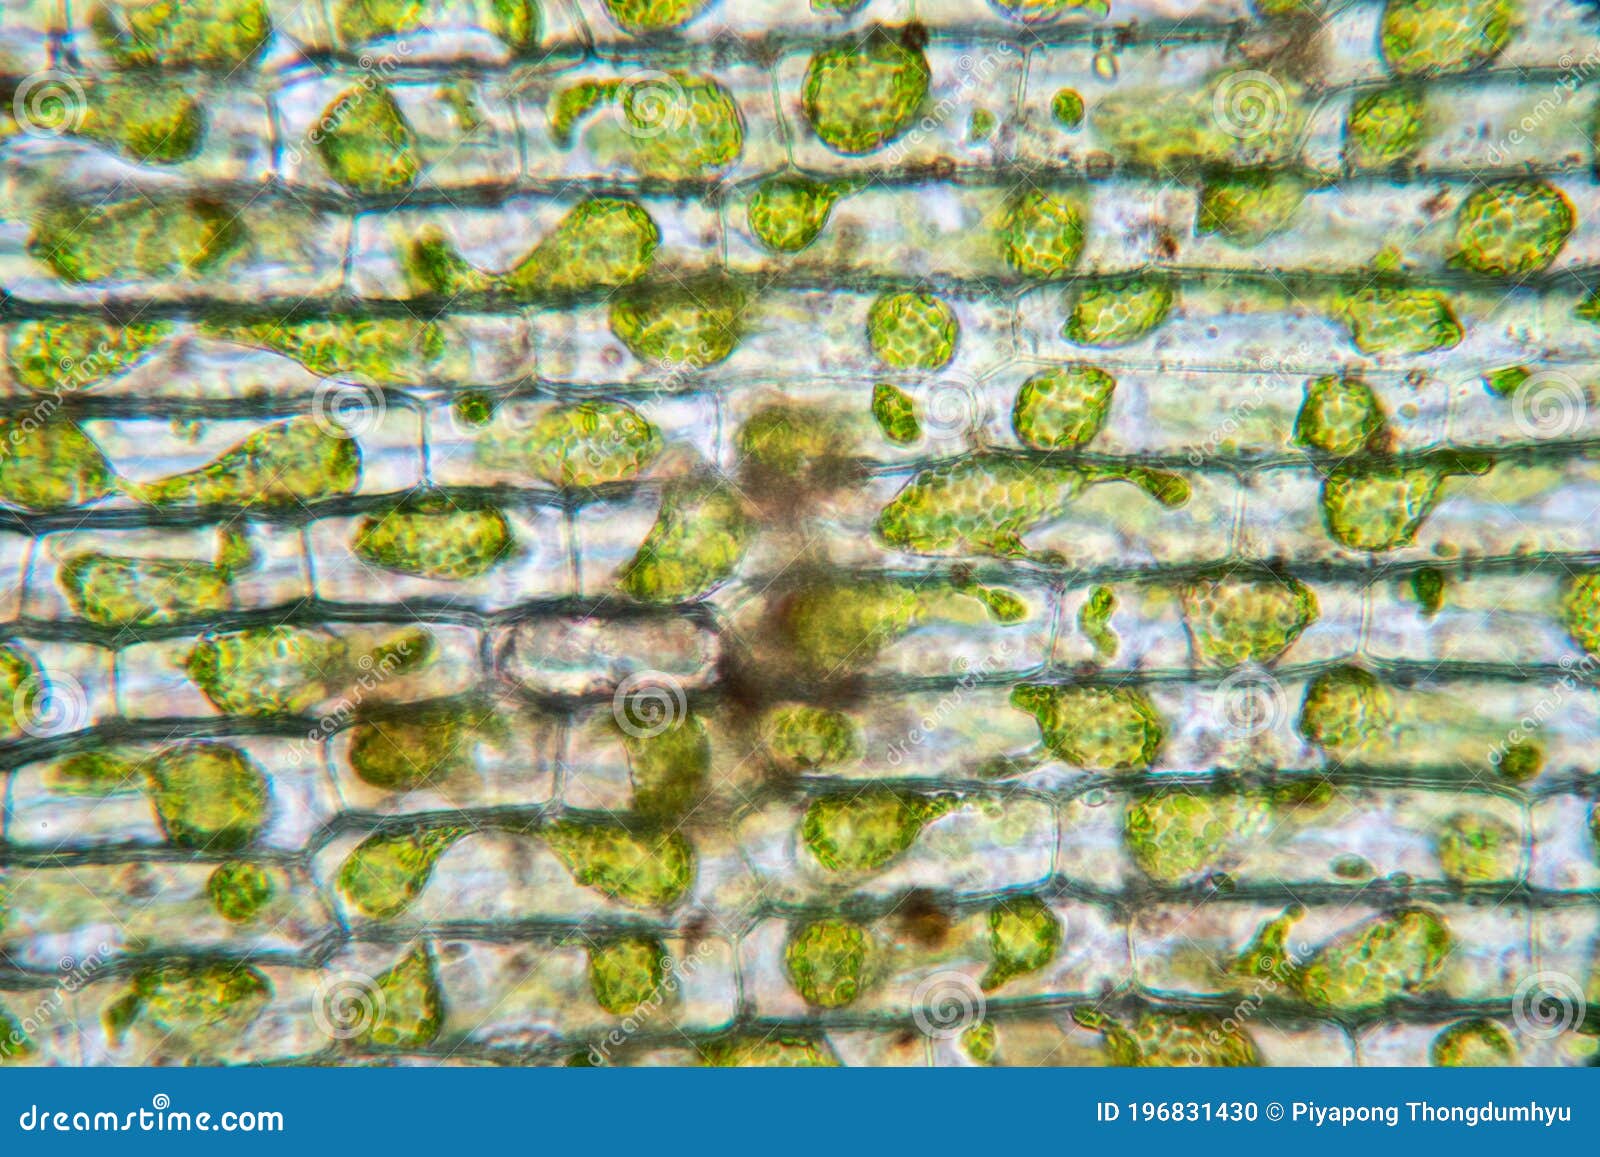 Cell Structure Hydrilla, View Of The Leaf Surface Showing ...